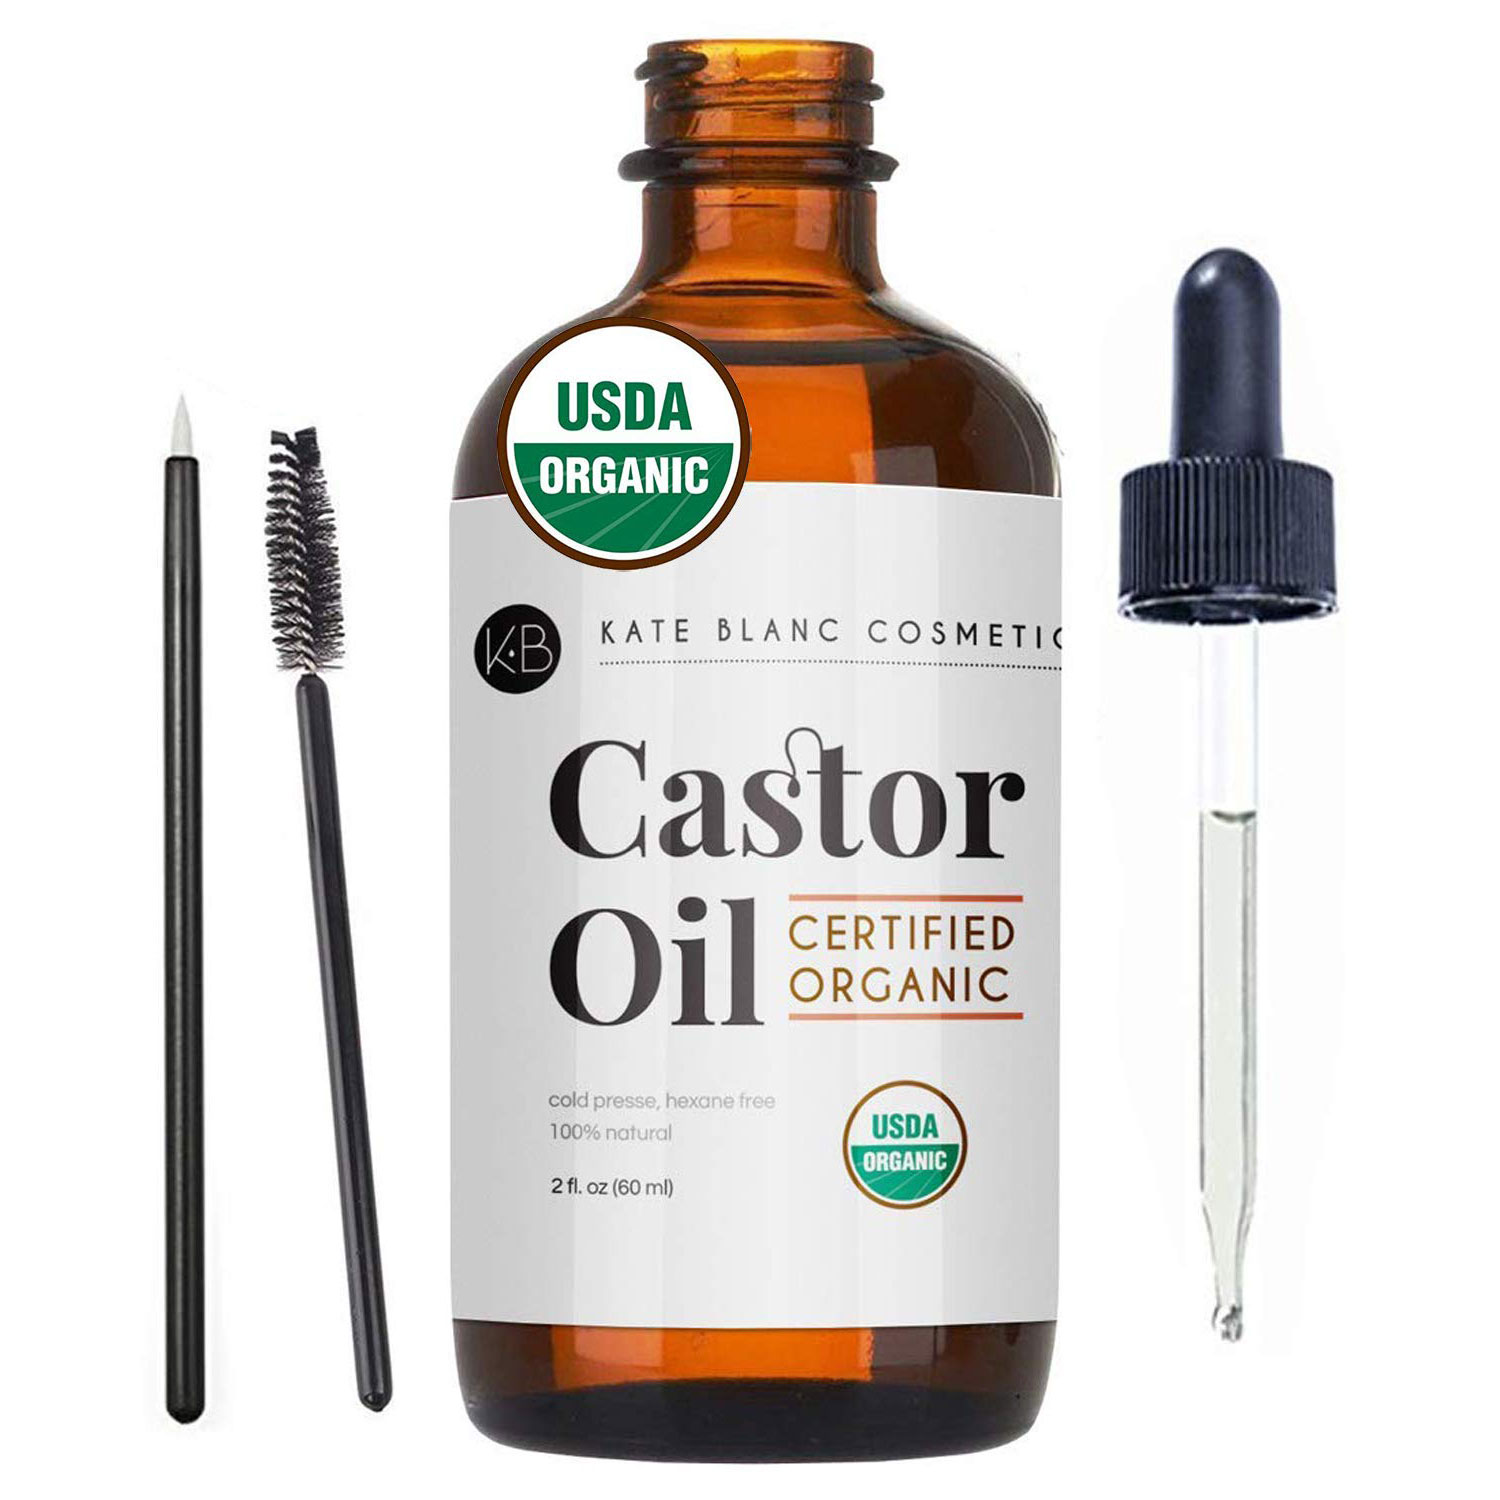 Kate Blanc Cosmetics Castor Oil Is Loved By Amazon ShoppersHelloGiggles